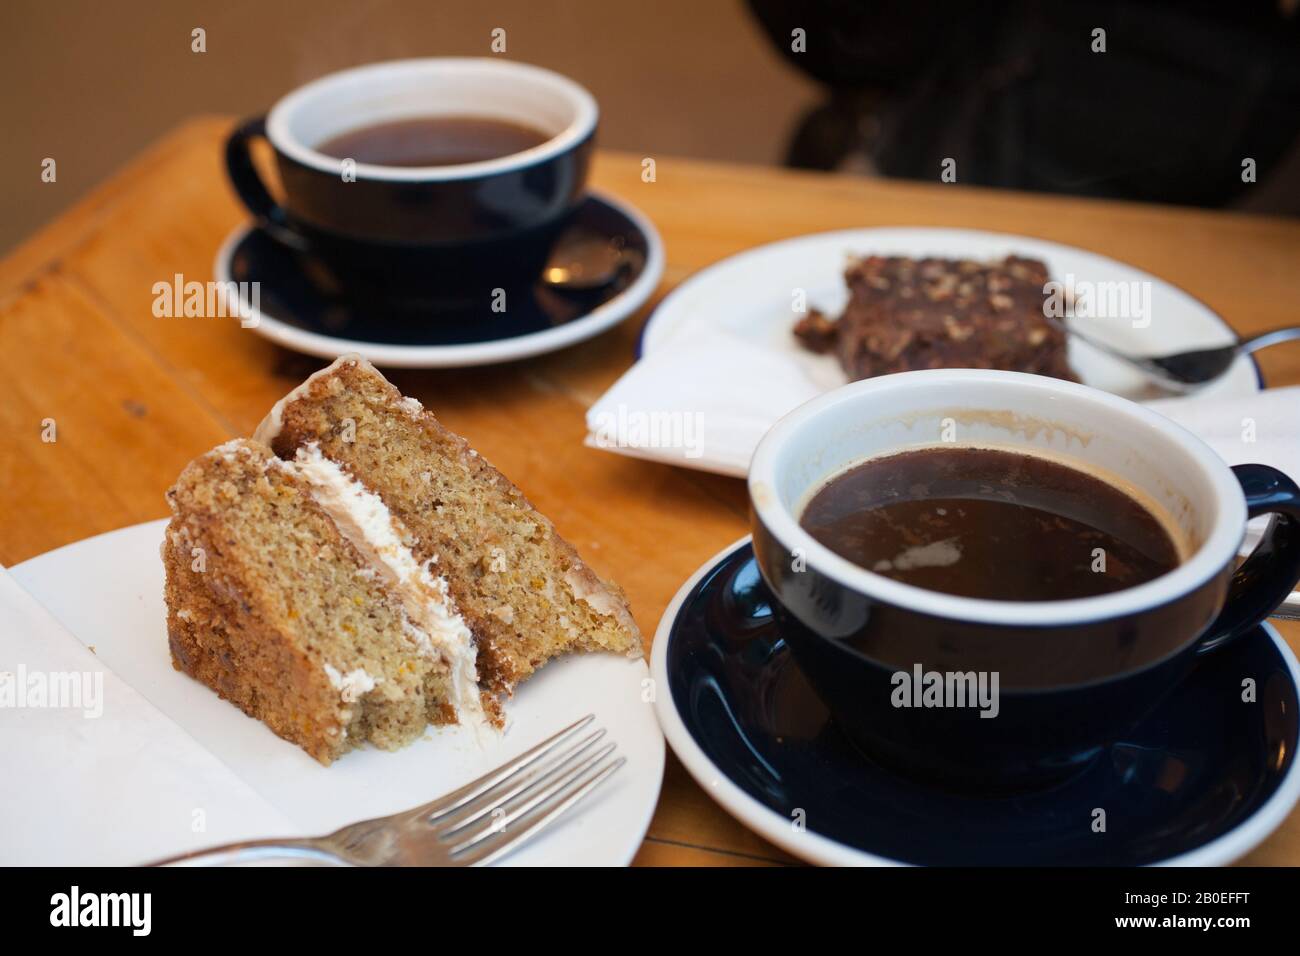 Coffee and cake on a table in a cafe in the UK Stock Photo